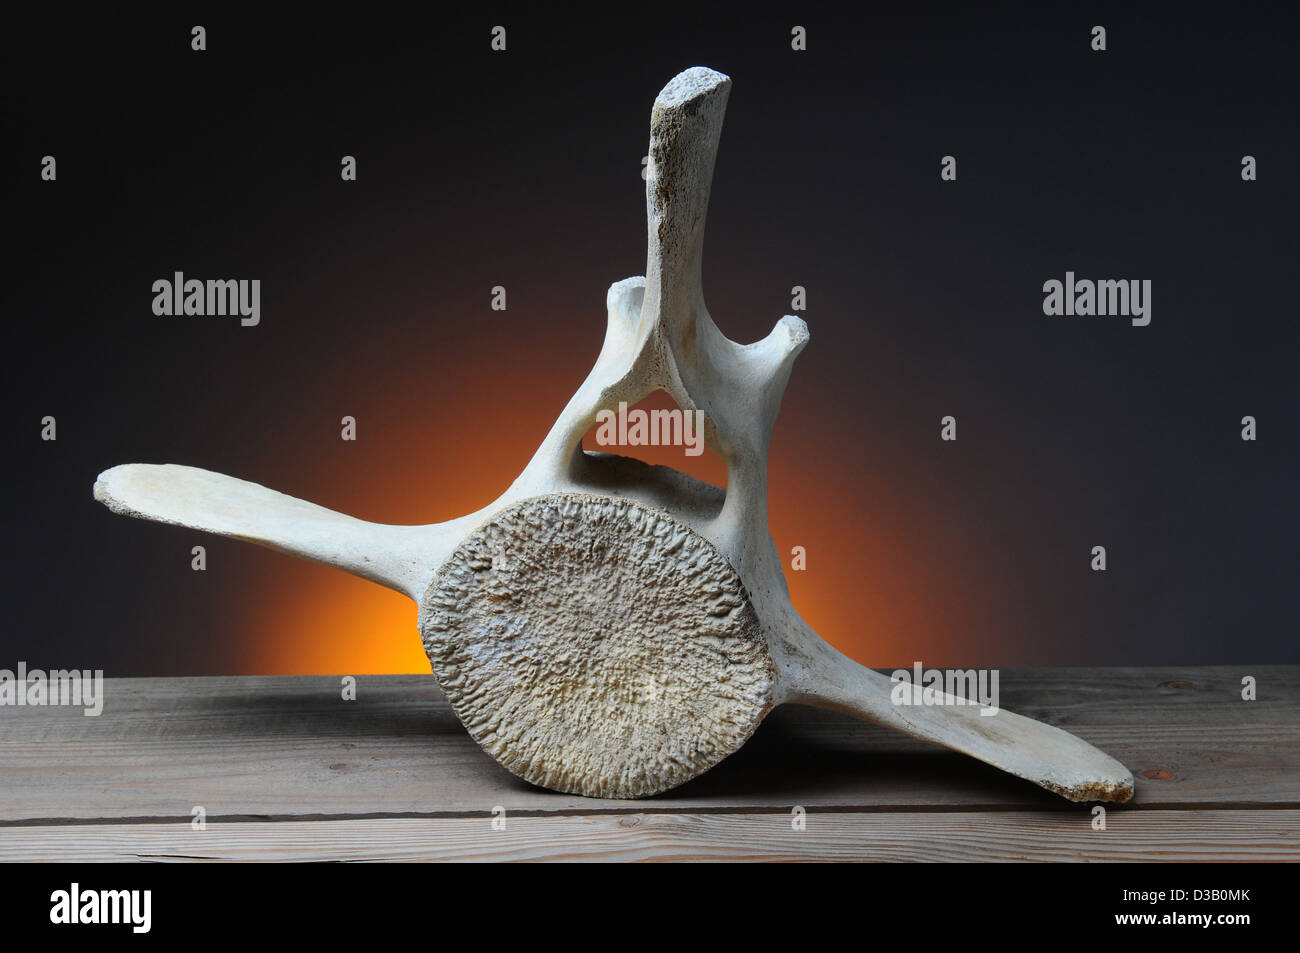 California Gray Whale vertebrae on a wood table with a light to dark warm background. Horizontal format. Stock Photo